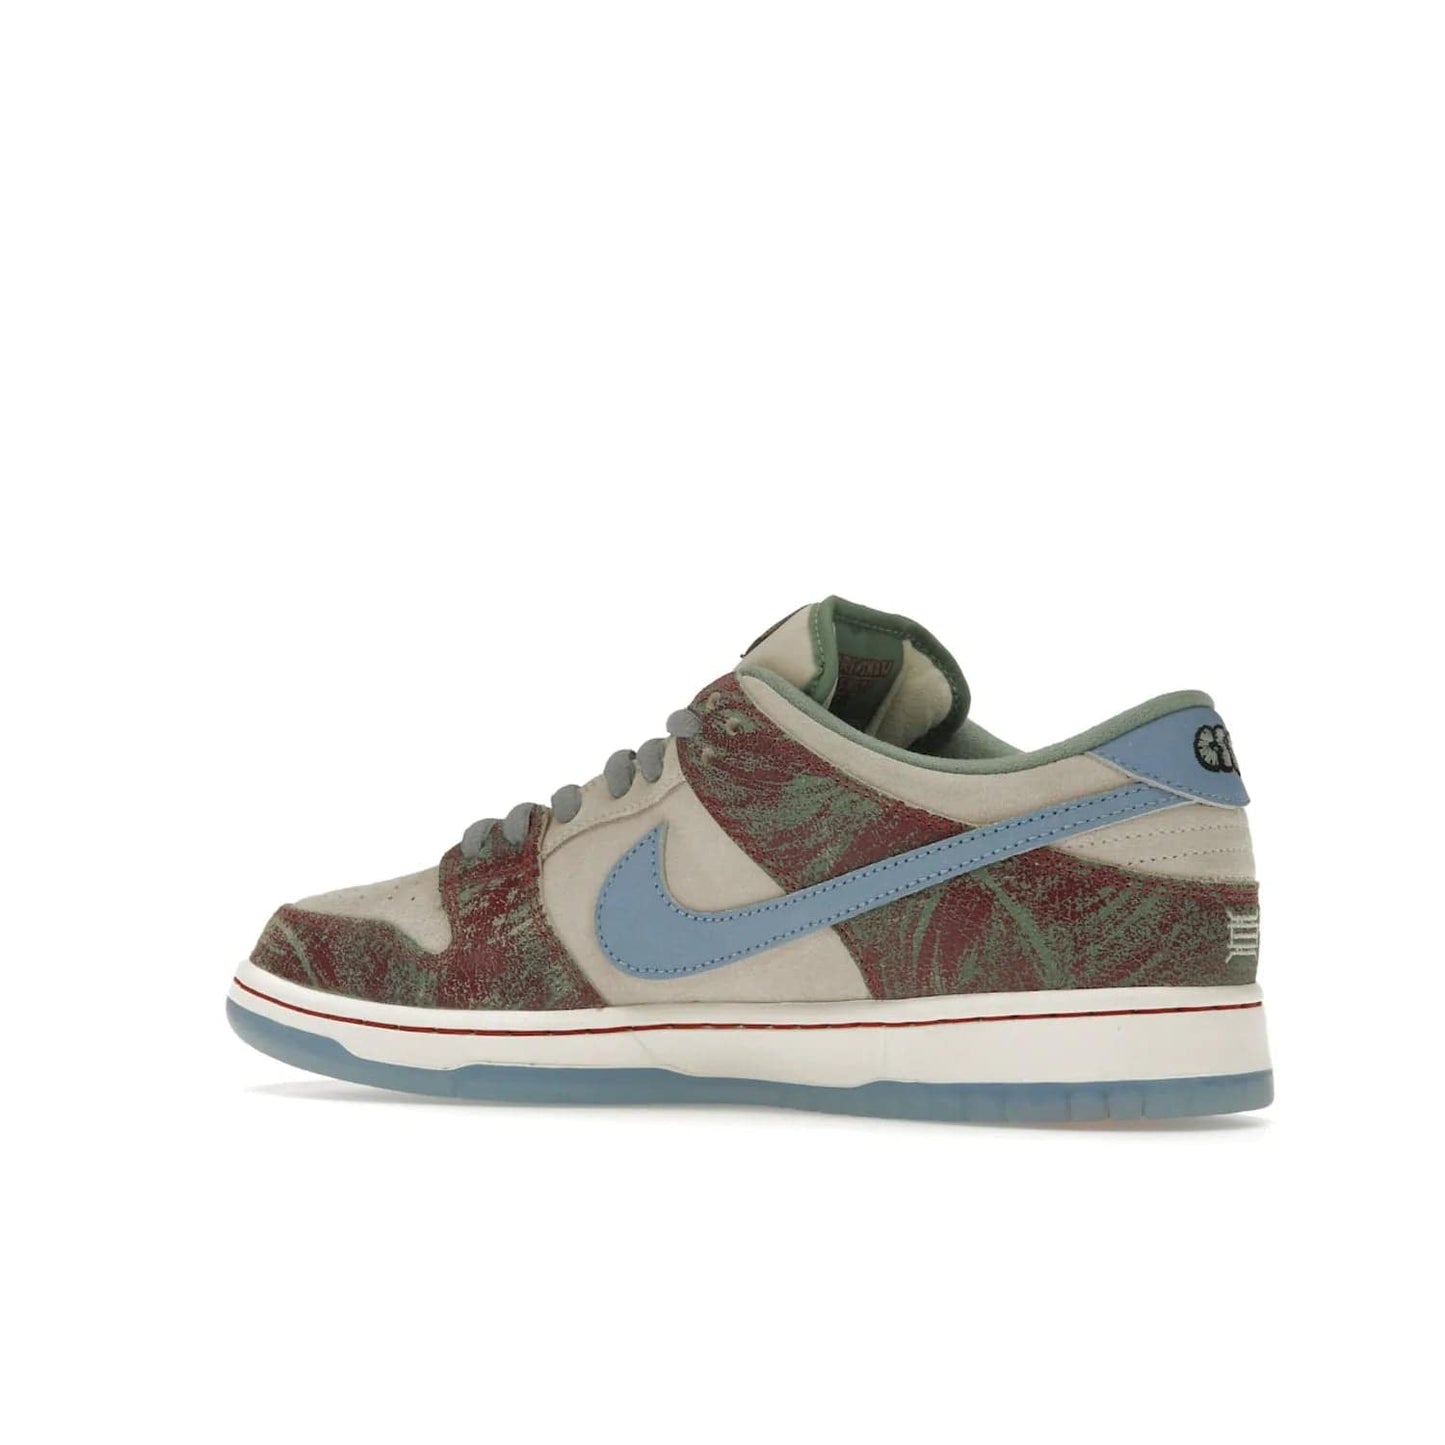 Nike SB Dunk Low Crenshaw Skate Club - Image 22 - Only at www.BallersClubKickz.com - Introducing the Nike SB Dunk Low Crenshaw Skate Club! Classic skate shoes with Sail and Light Blue upper, Cedar accents, padded collars and superior grip for comfortable, stable performance and style. Ideal for any skate session.